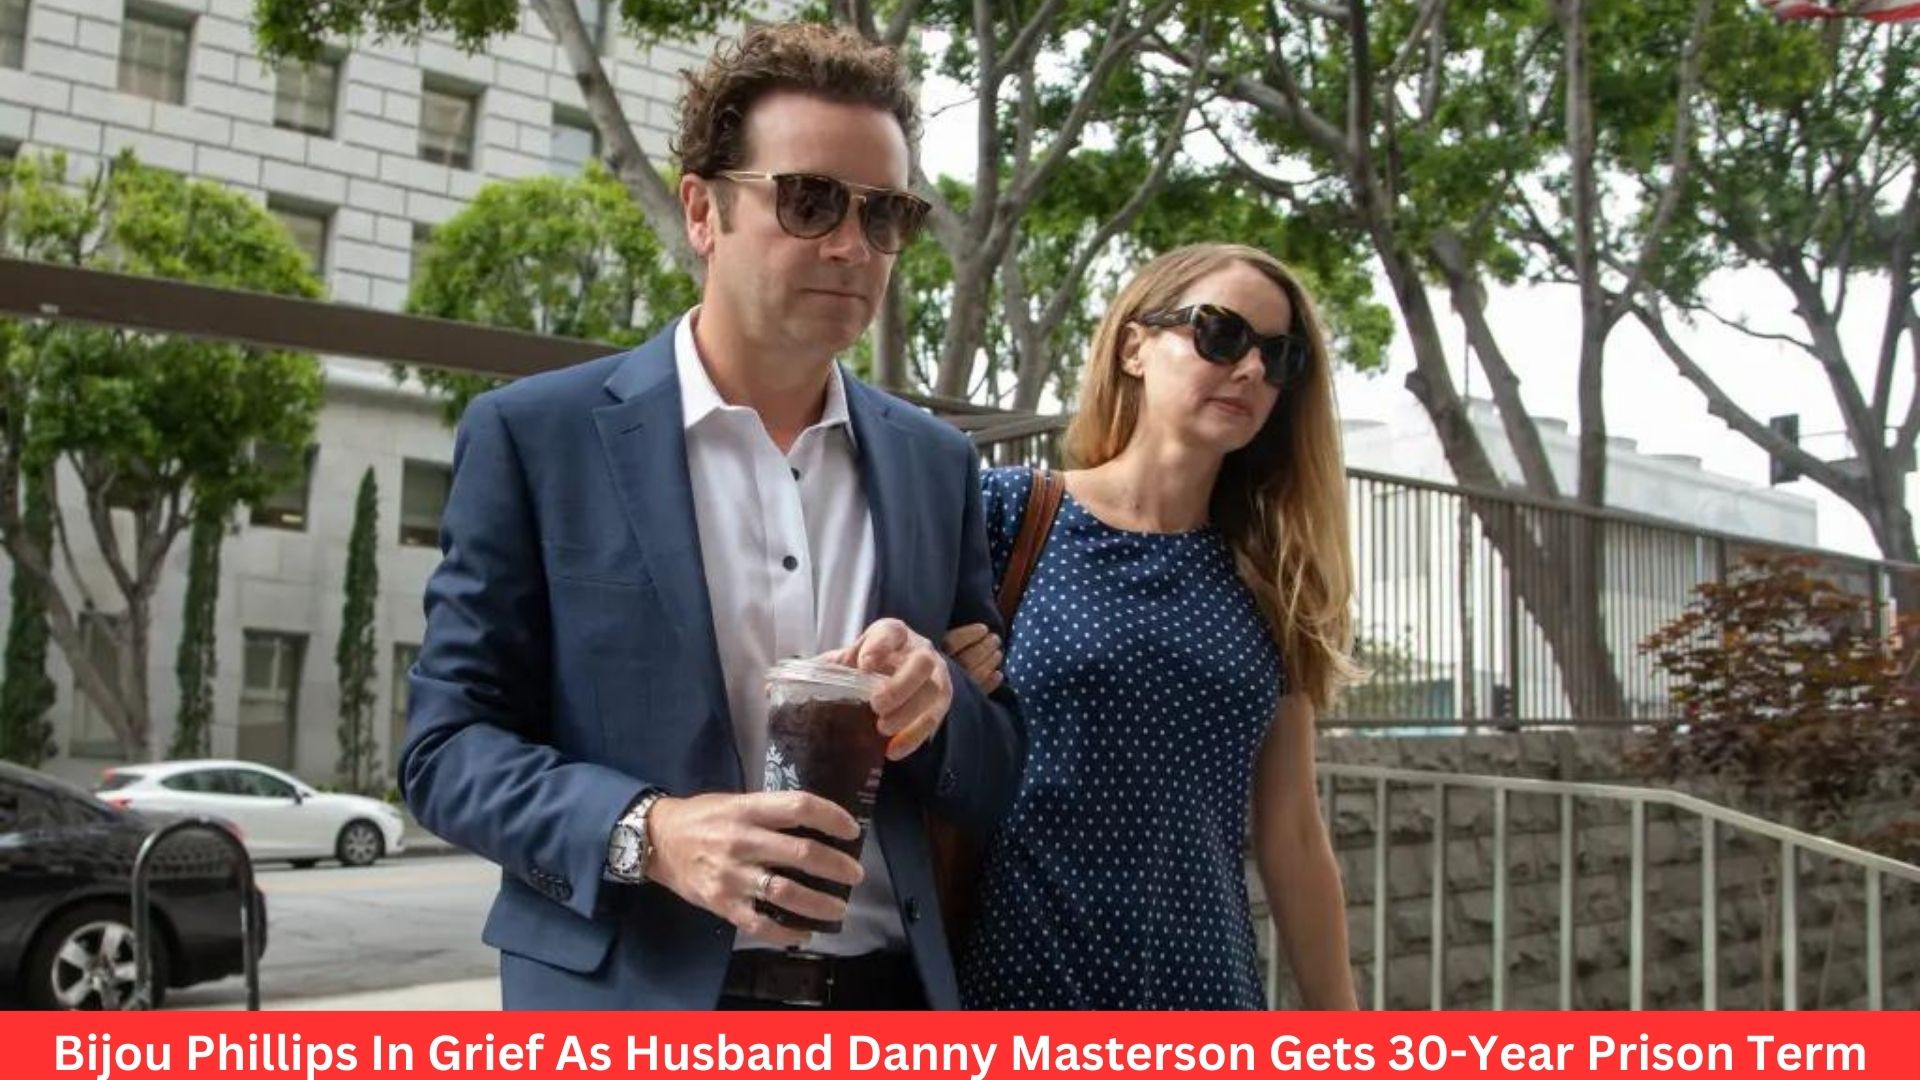 Bijou Phillips In Grief As Husband Danny Masterson Gets 30-Year Prison Term